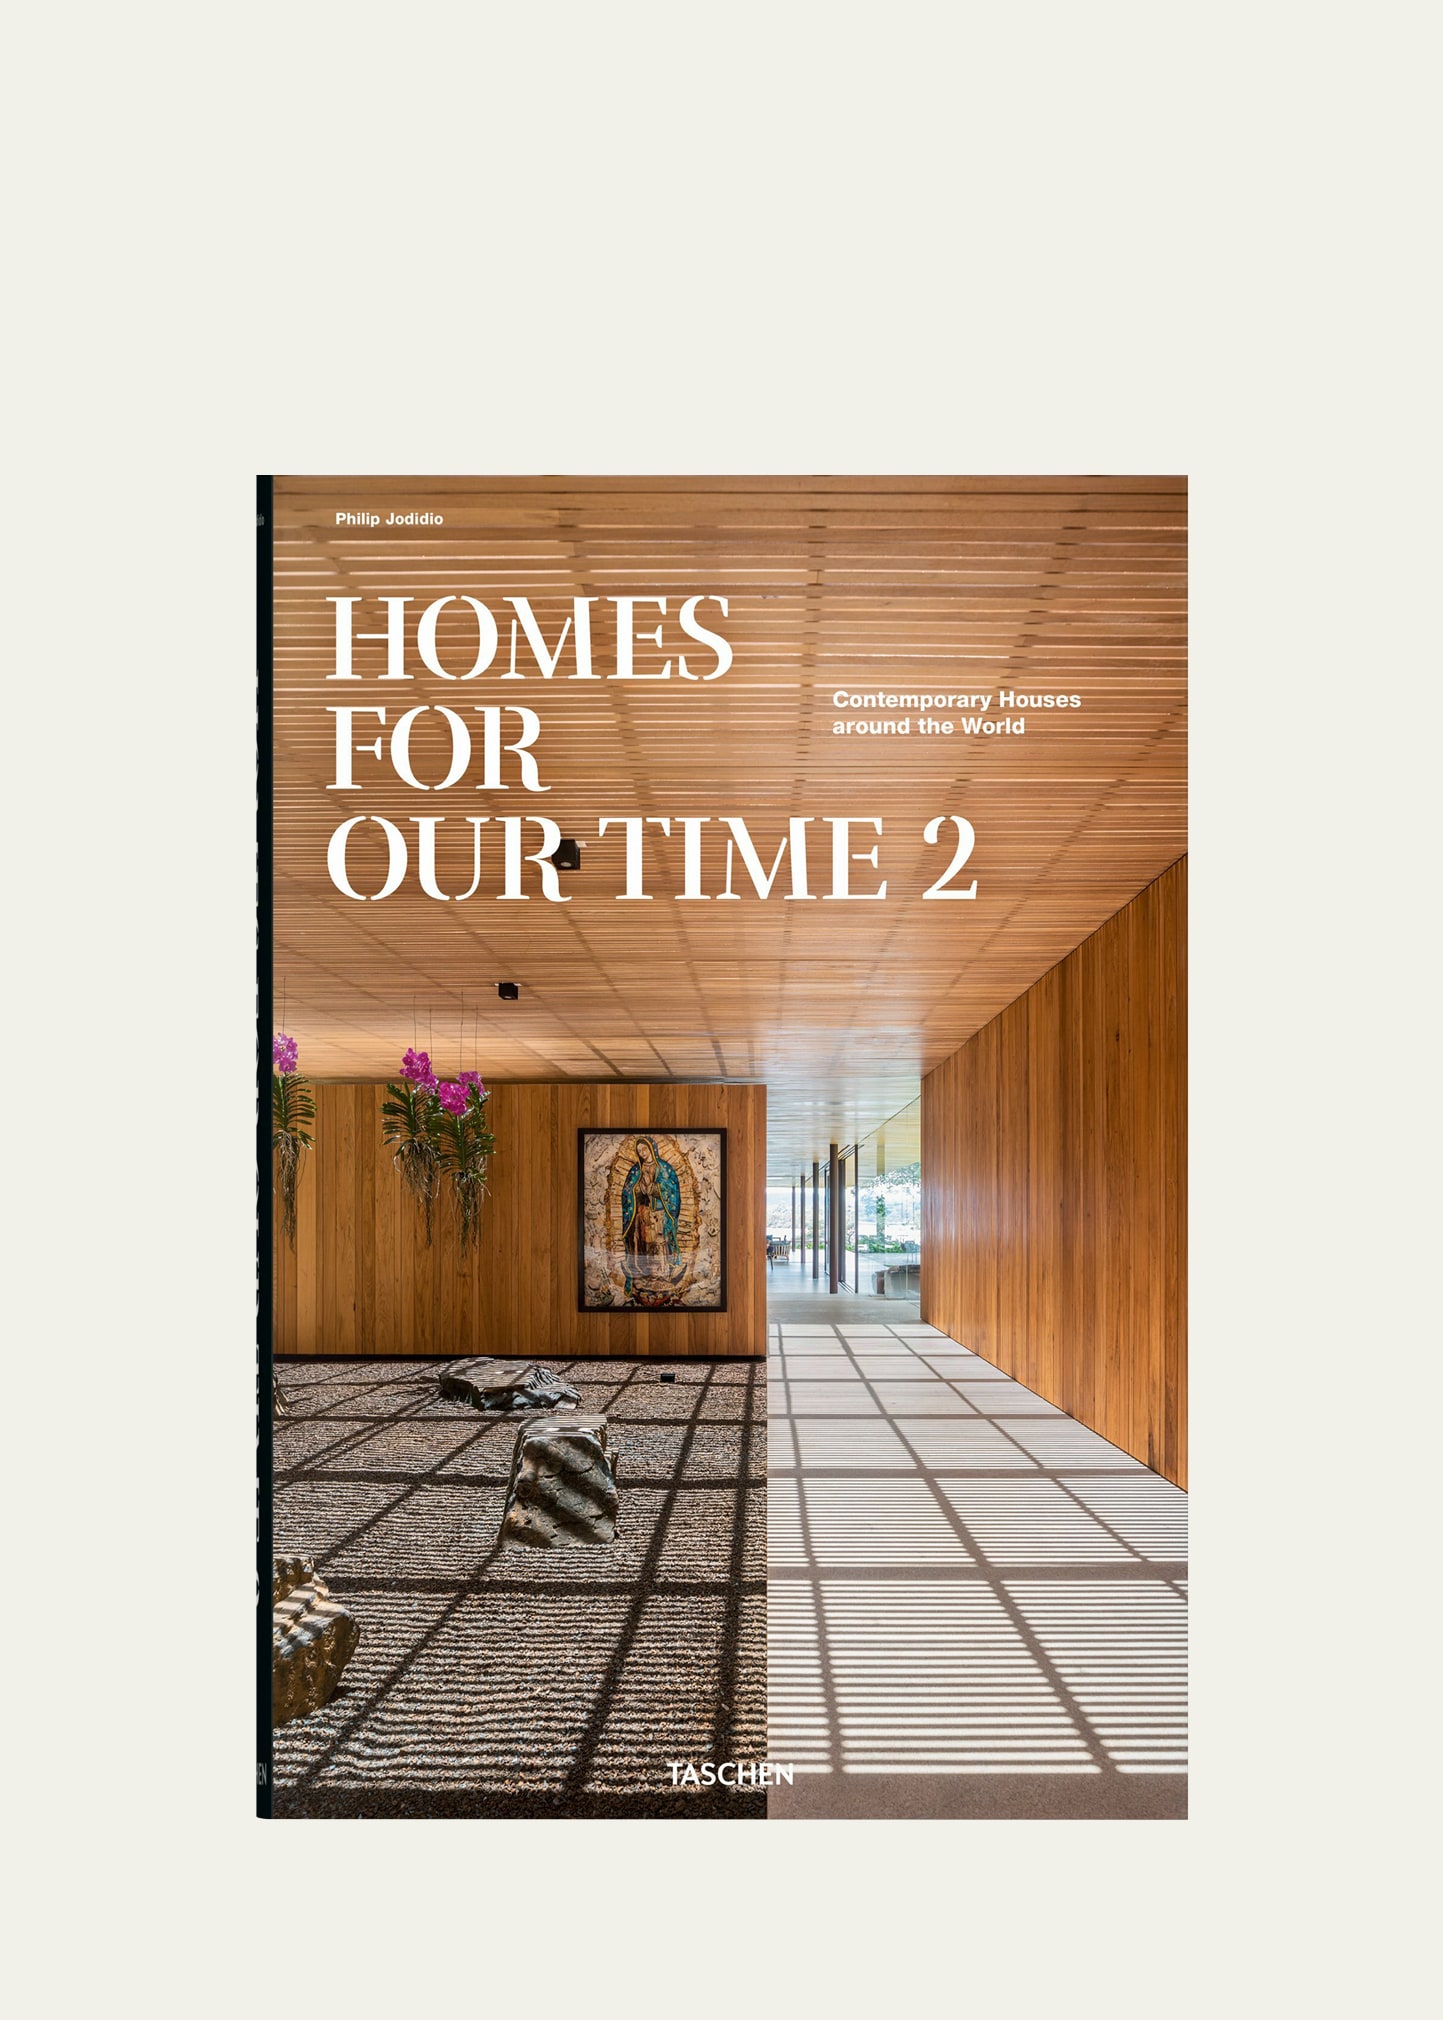 "Homes For Our Time 2: Contemporary Houses Around the World (Vol. 2)" Book by Philip Jodidio